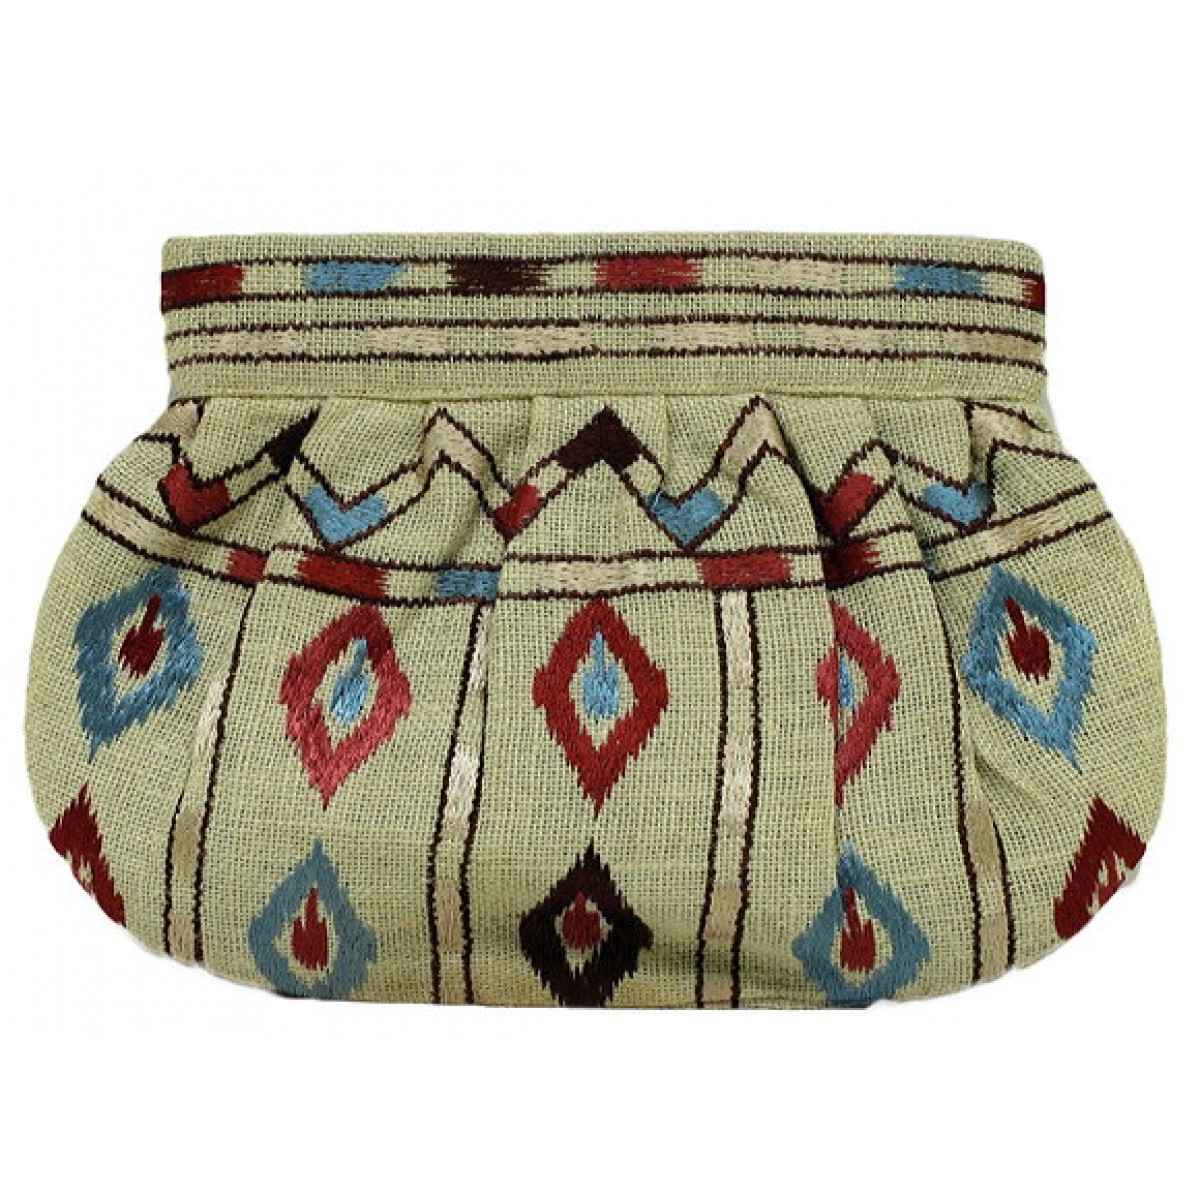 Jute Ikat Embroidered Clutch